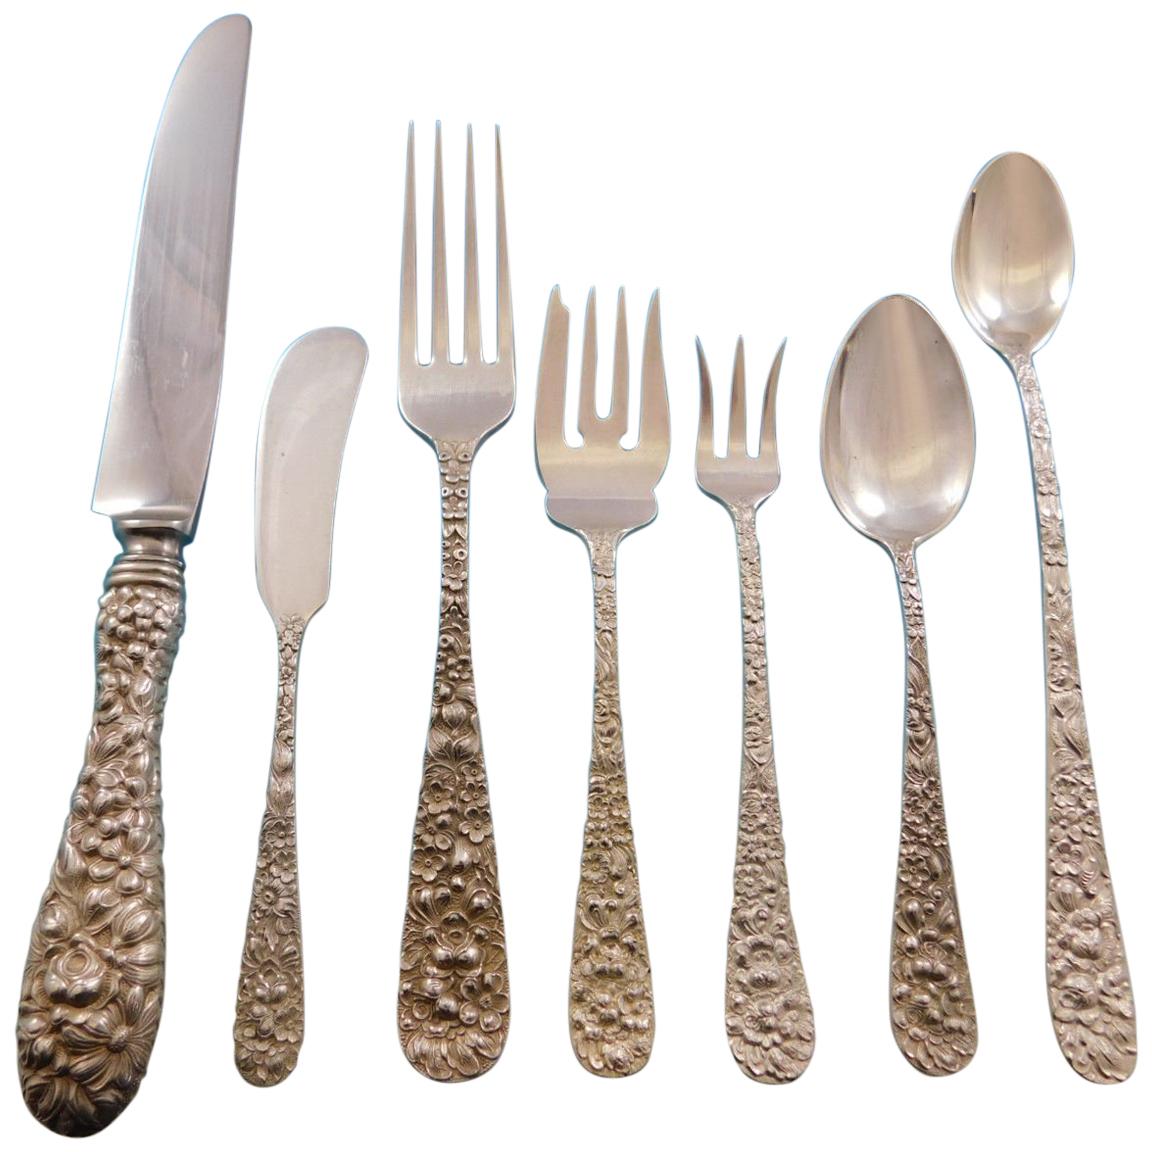 Rose by Stieff Sterling Silver Flatware Set for 12 Service 97 Pc Repoussé Dinner